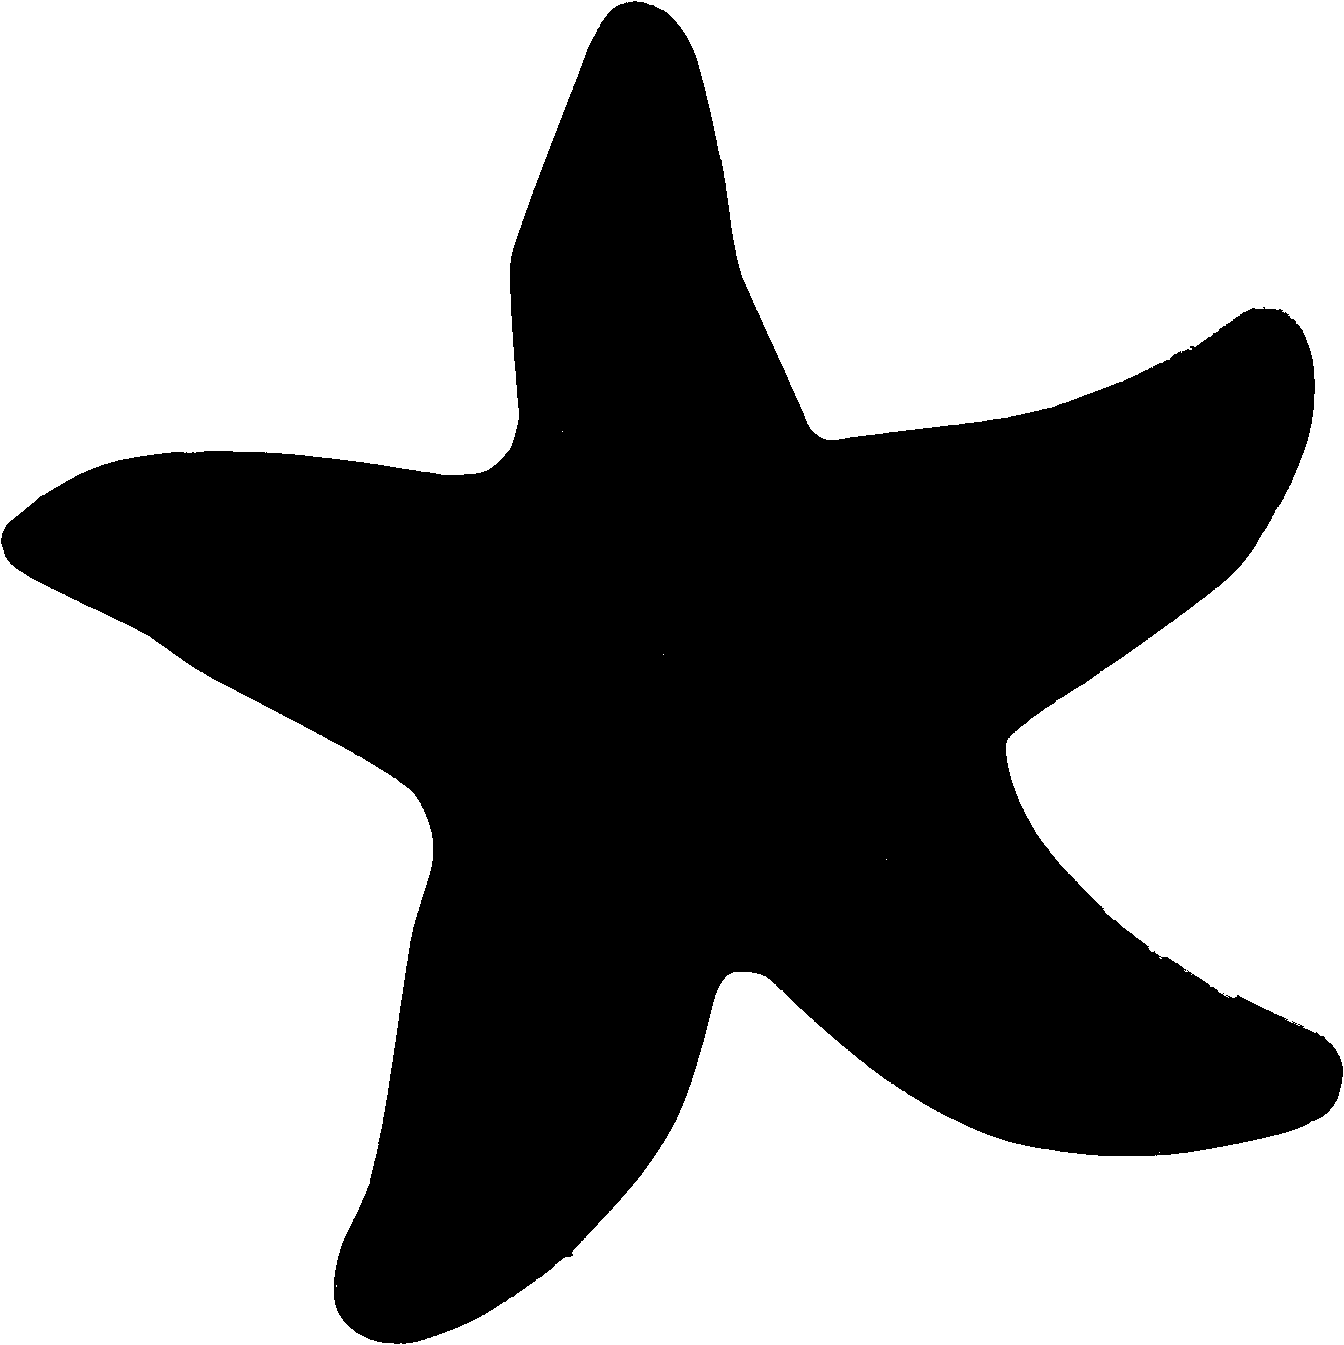 Outline Of Starfish - ClipArt Best